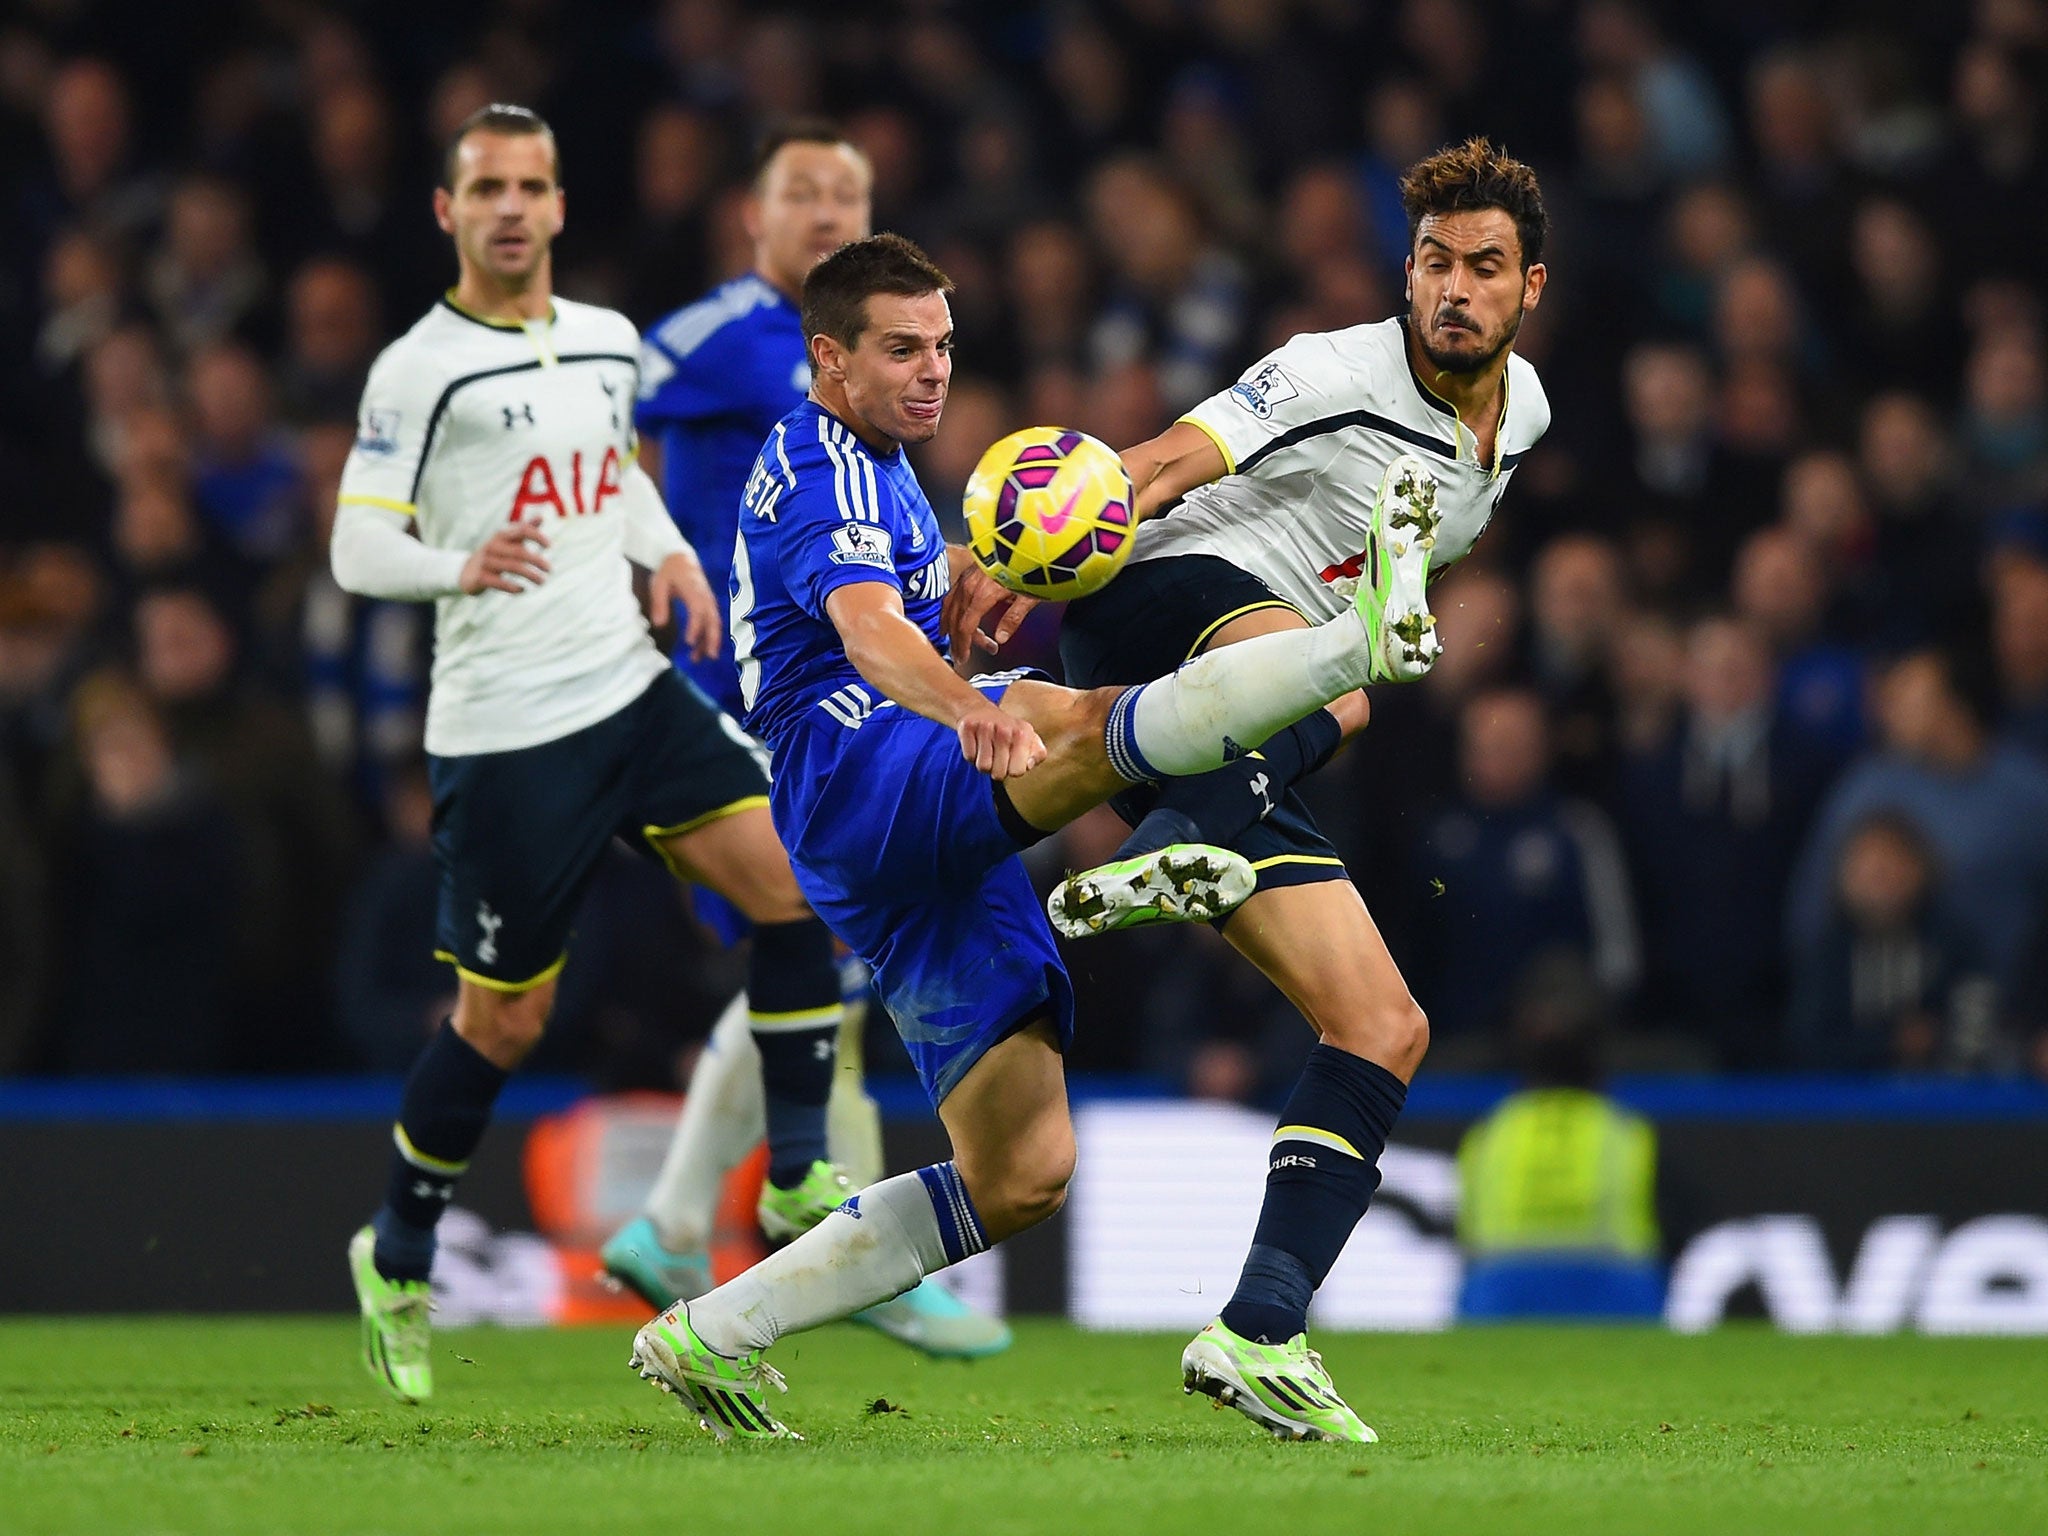 Tottenham struggled to muster an attacking threat